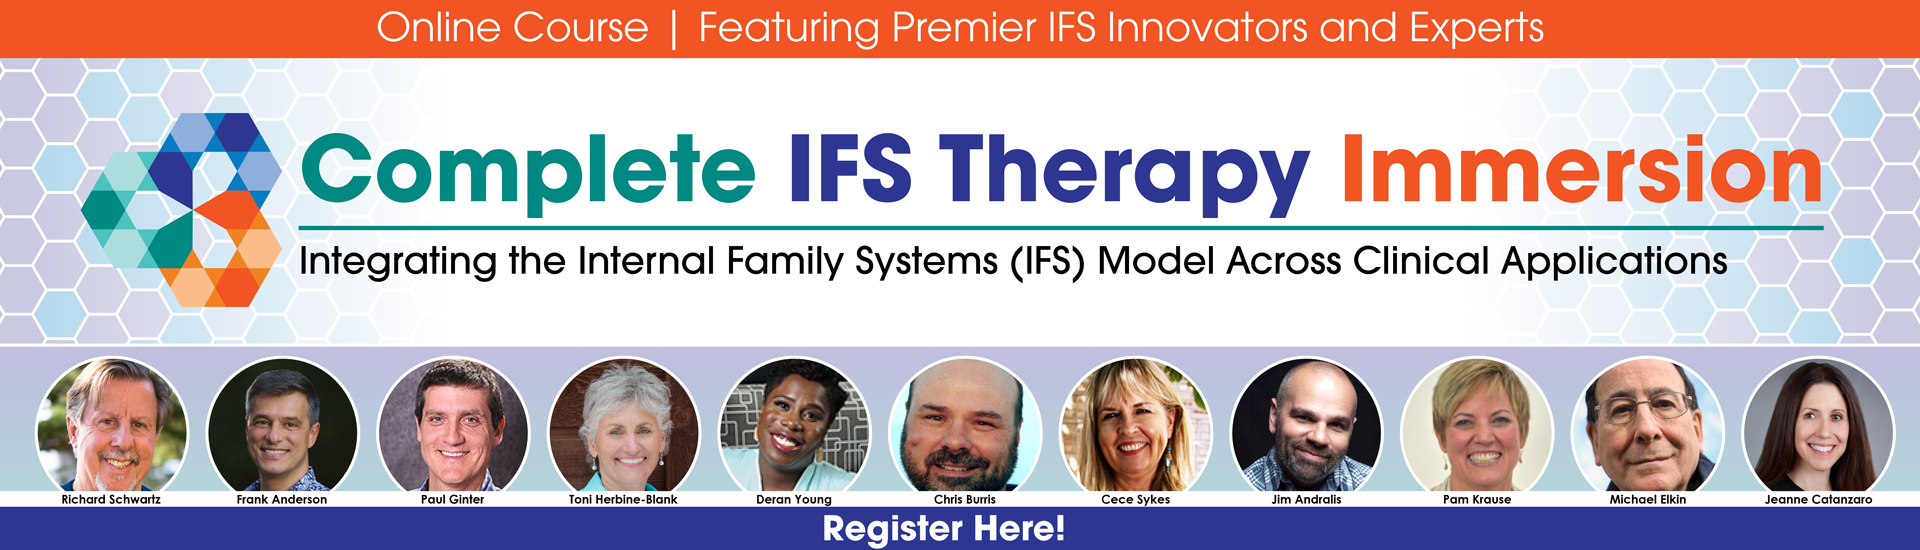 FREE Course! | IFS Immersion Live Online Course